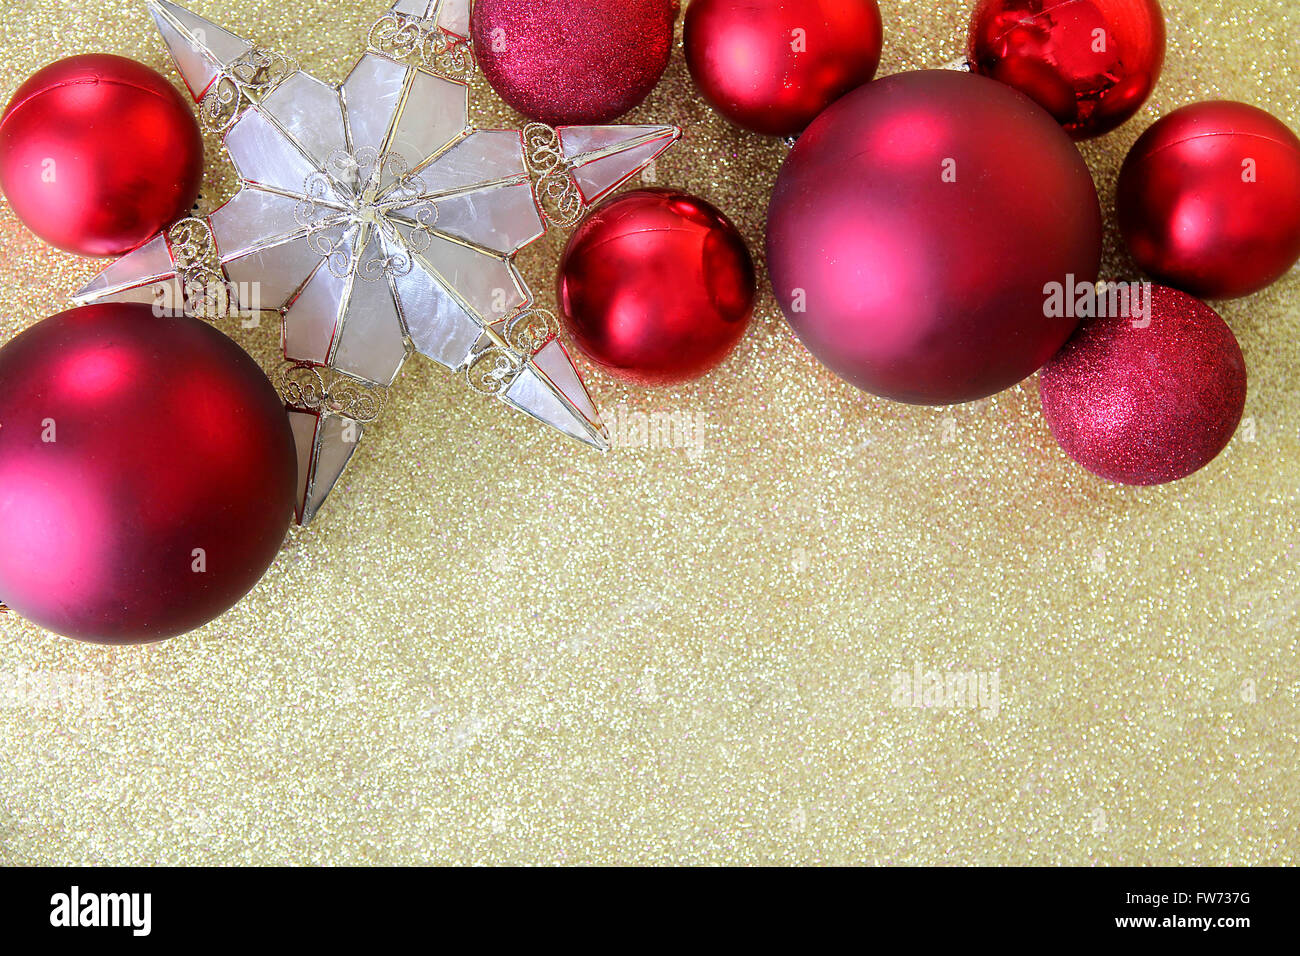 Red Christmas bulb decorations and a star shaped tree topper border the top of a background gold glitter fabric with copy-space. Stock Photo